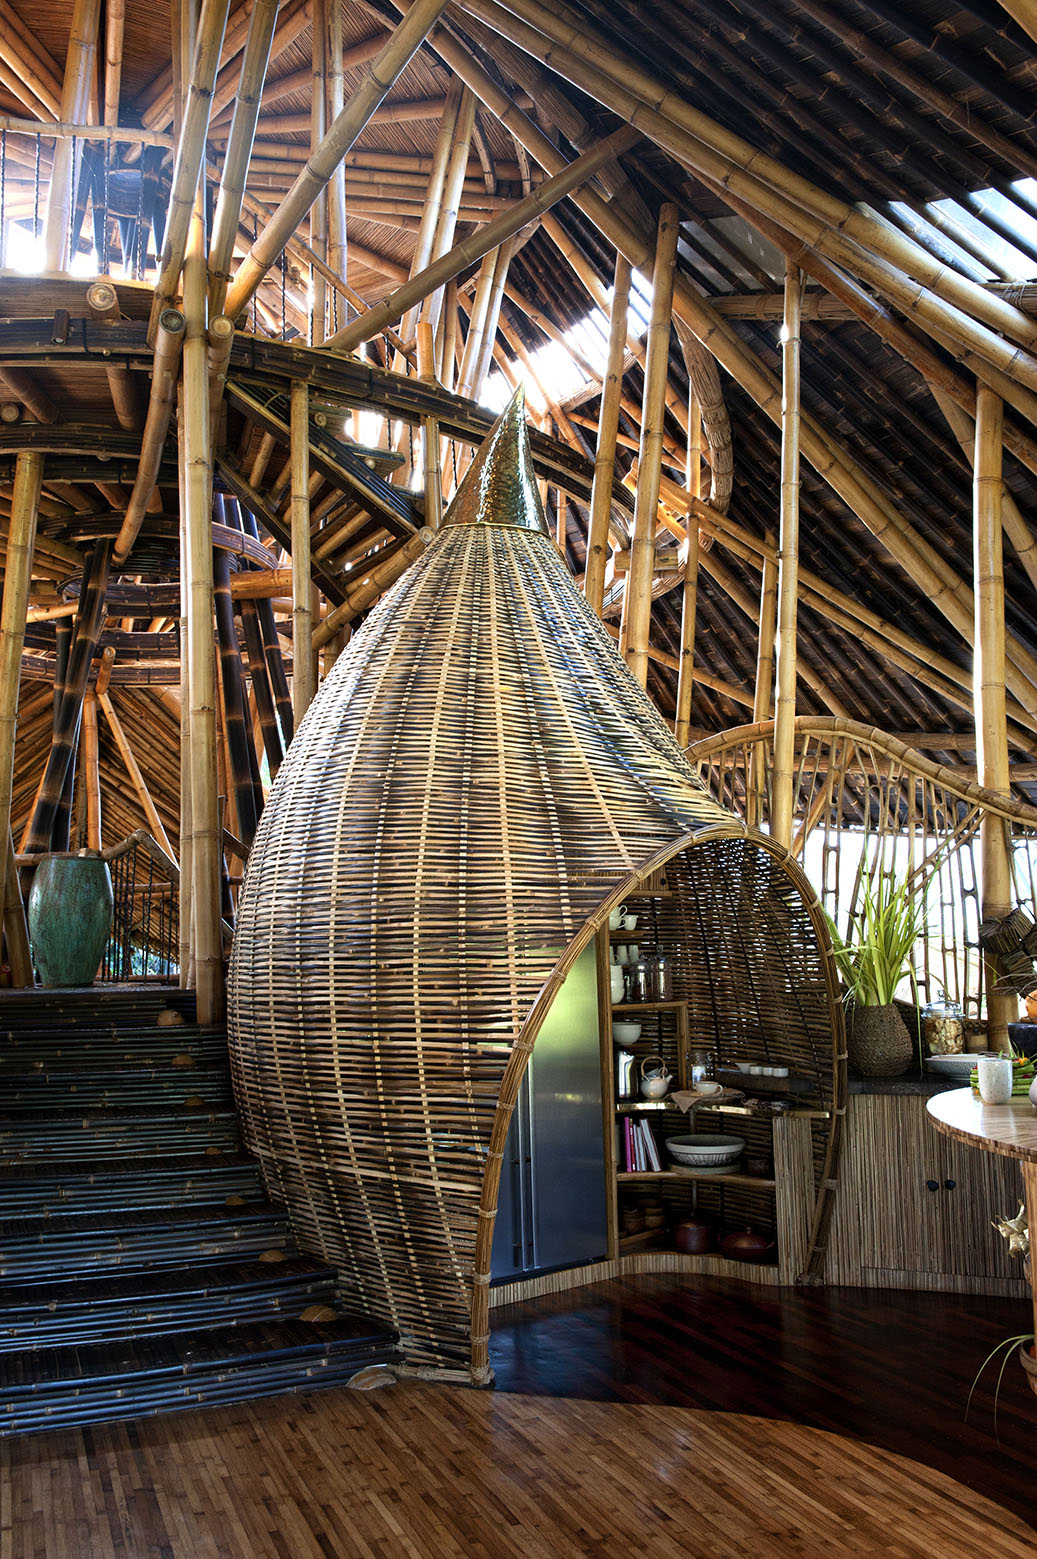 bamboo bali architecture amazing sharma interior springs dramatic idesignarch houses built adorable